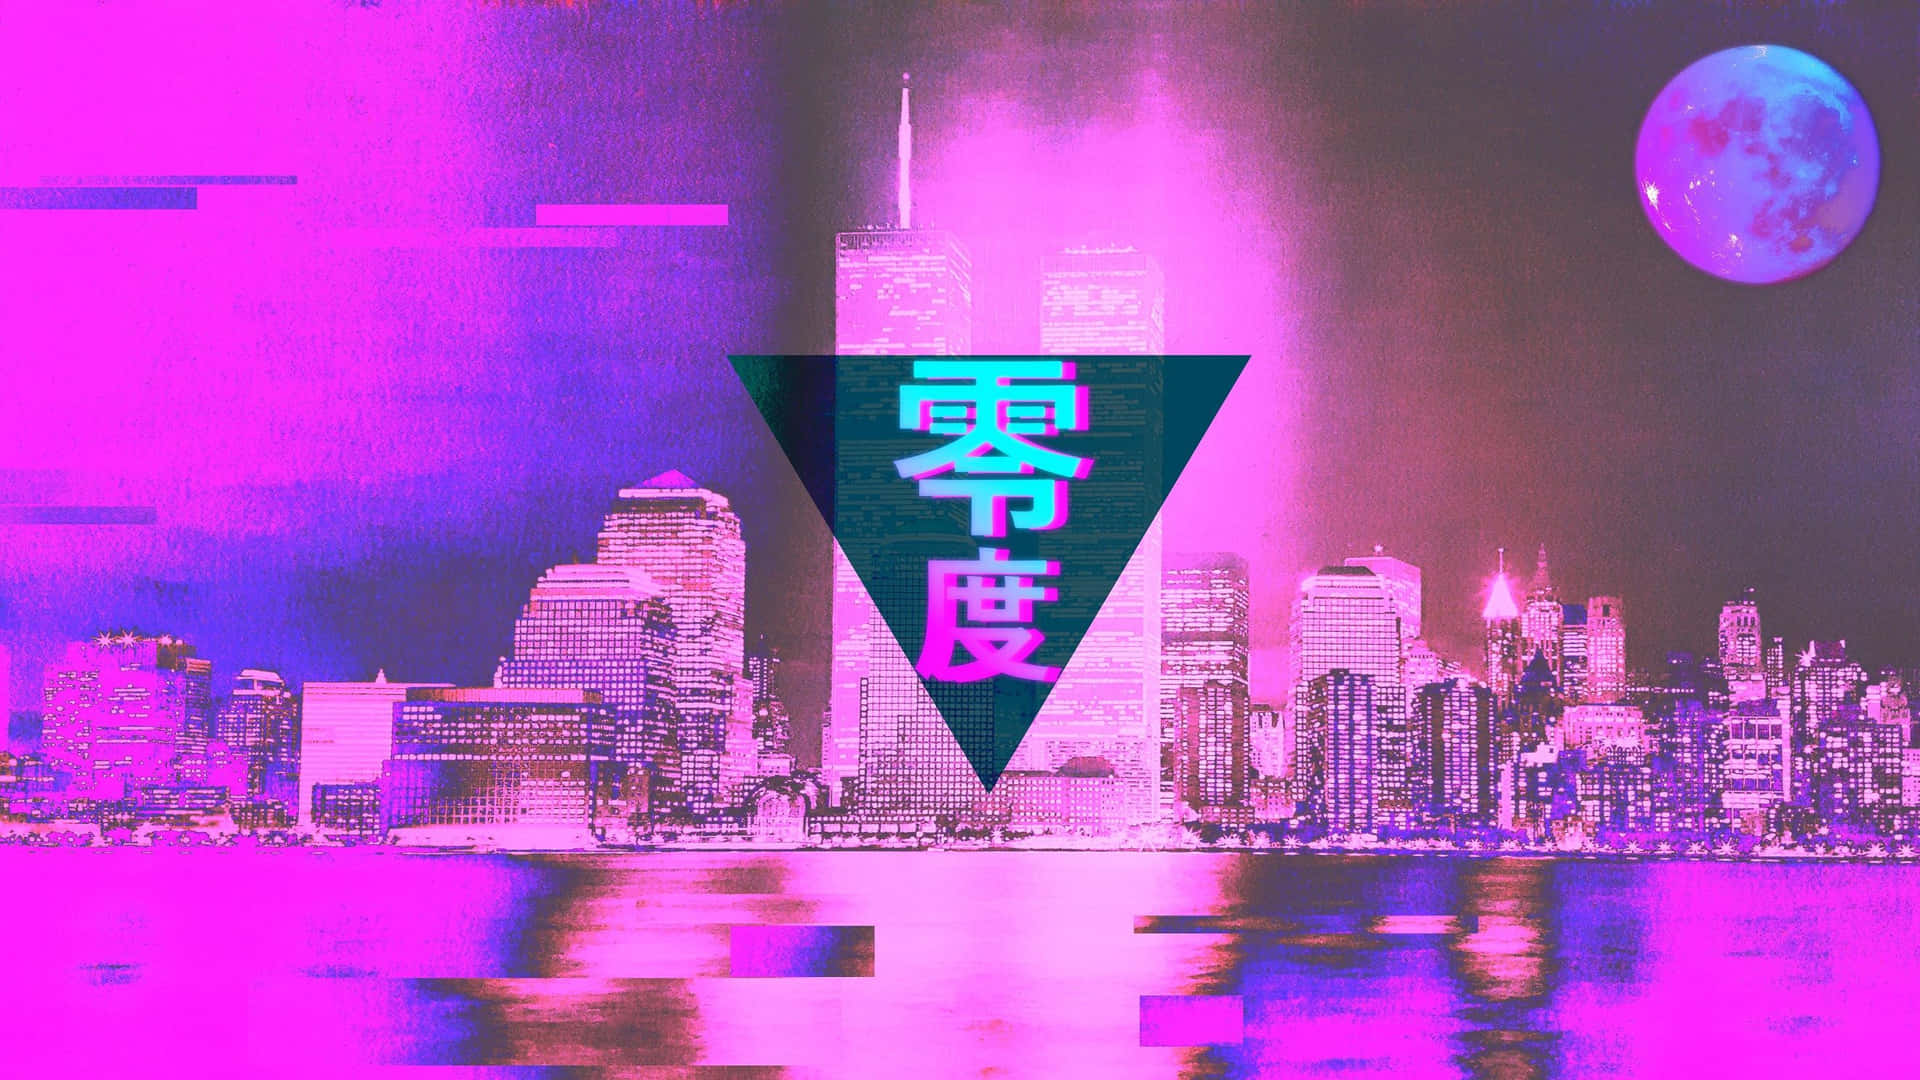 Get your hands on the ultra-modern Purple Aesthetics Computer today Wallpaper